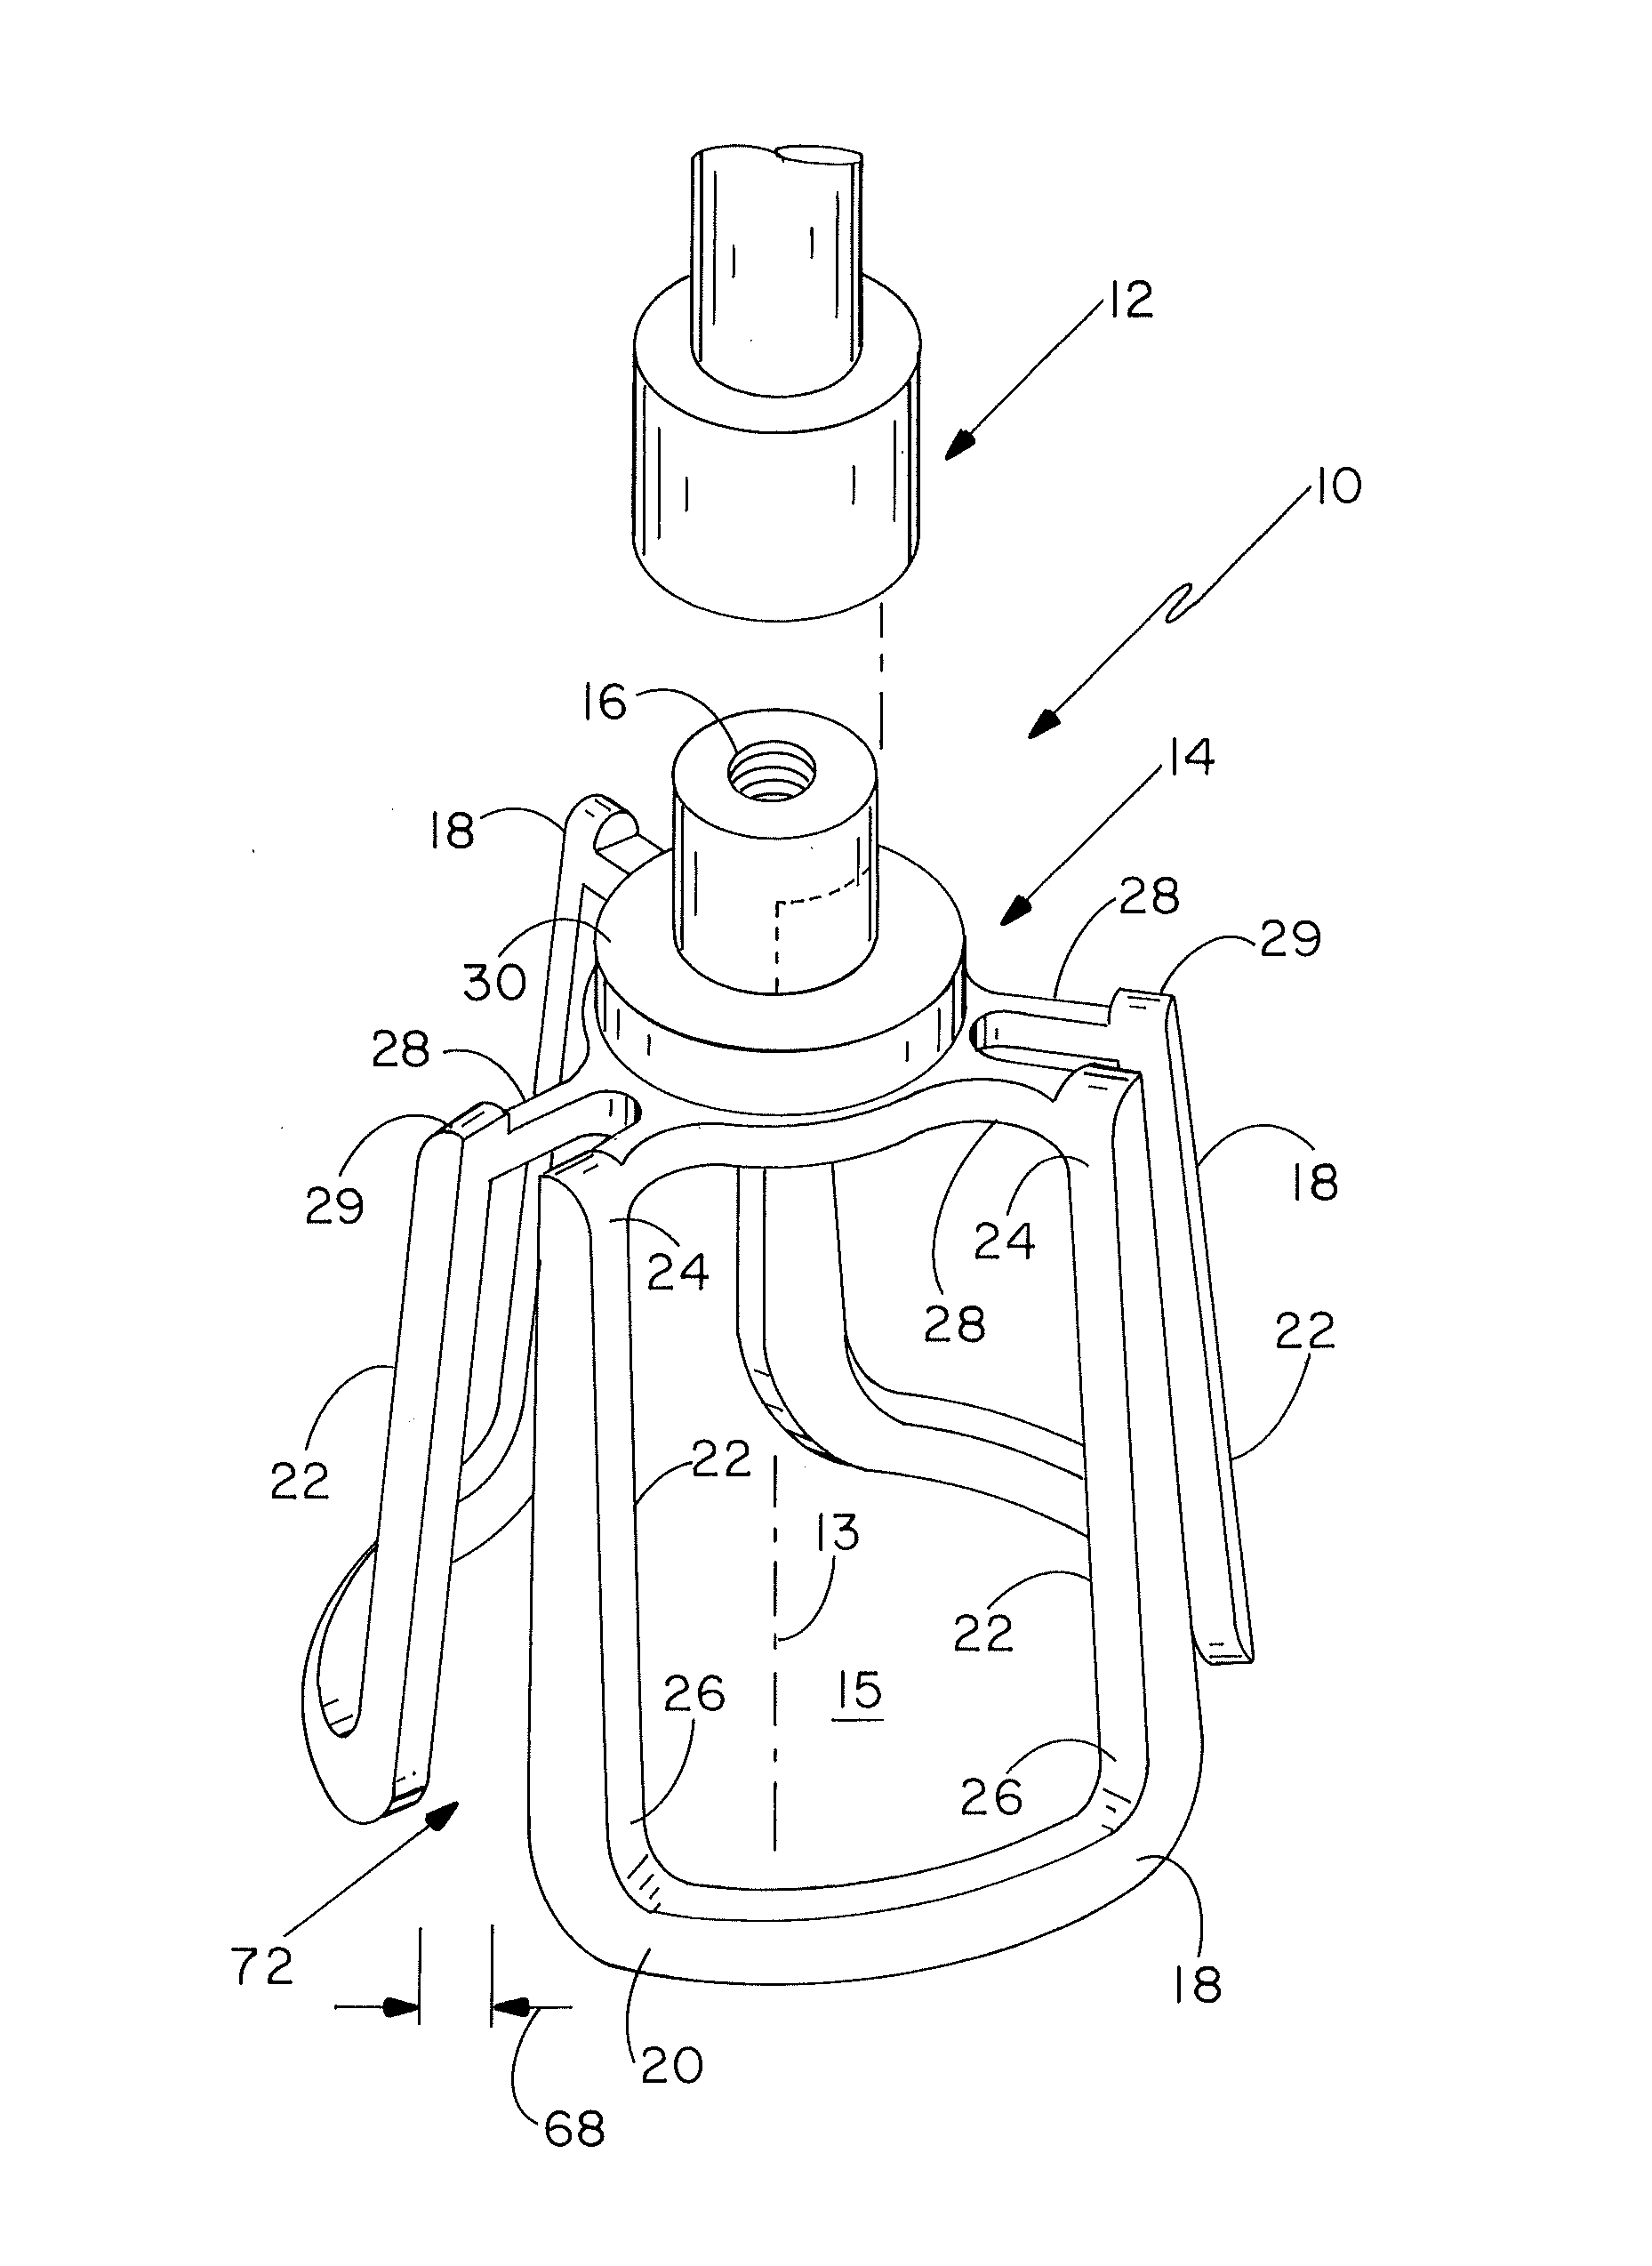 Tool for implantation of replacement heart valve